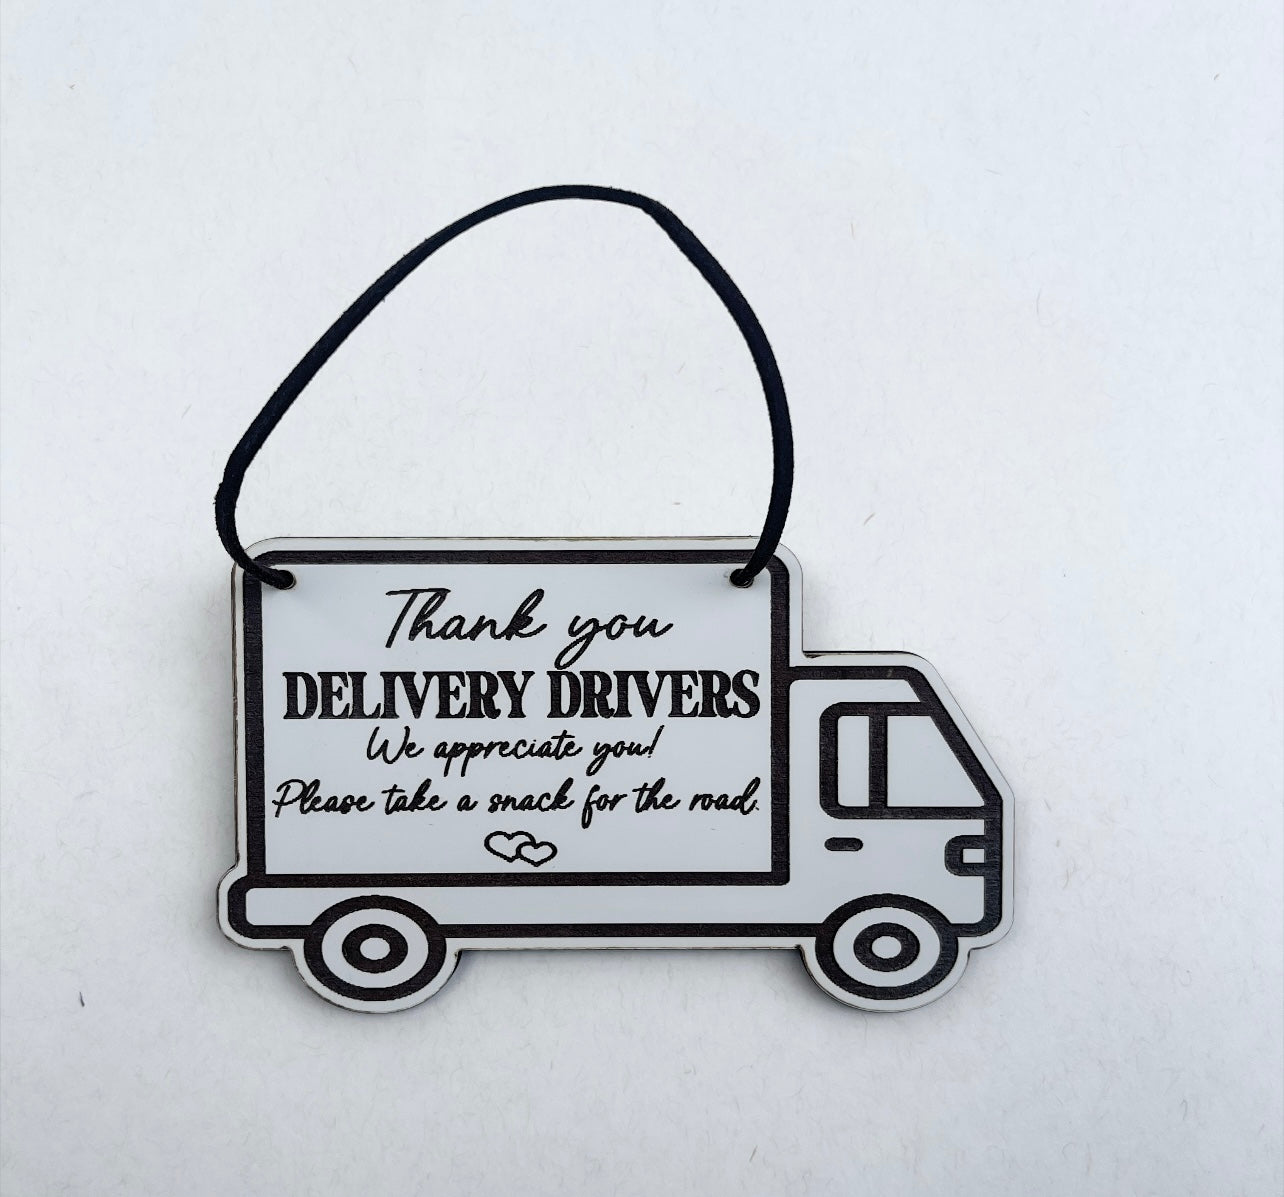 Delivery driver thank you snack sign